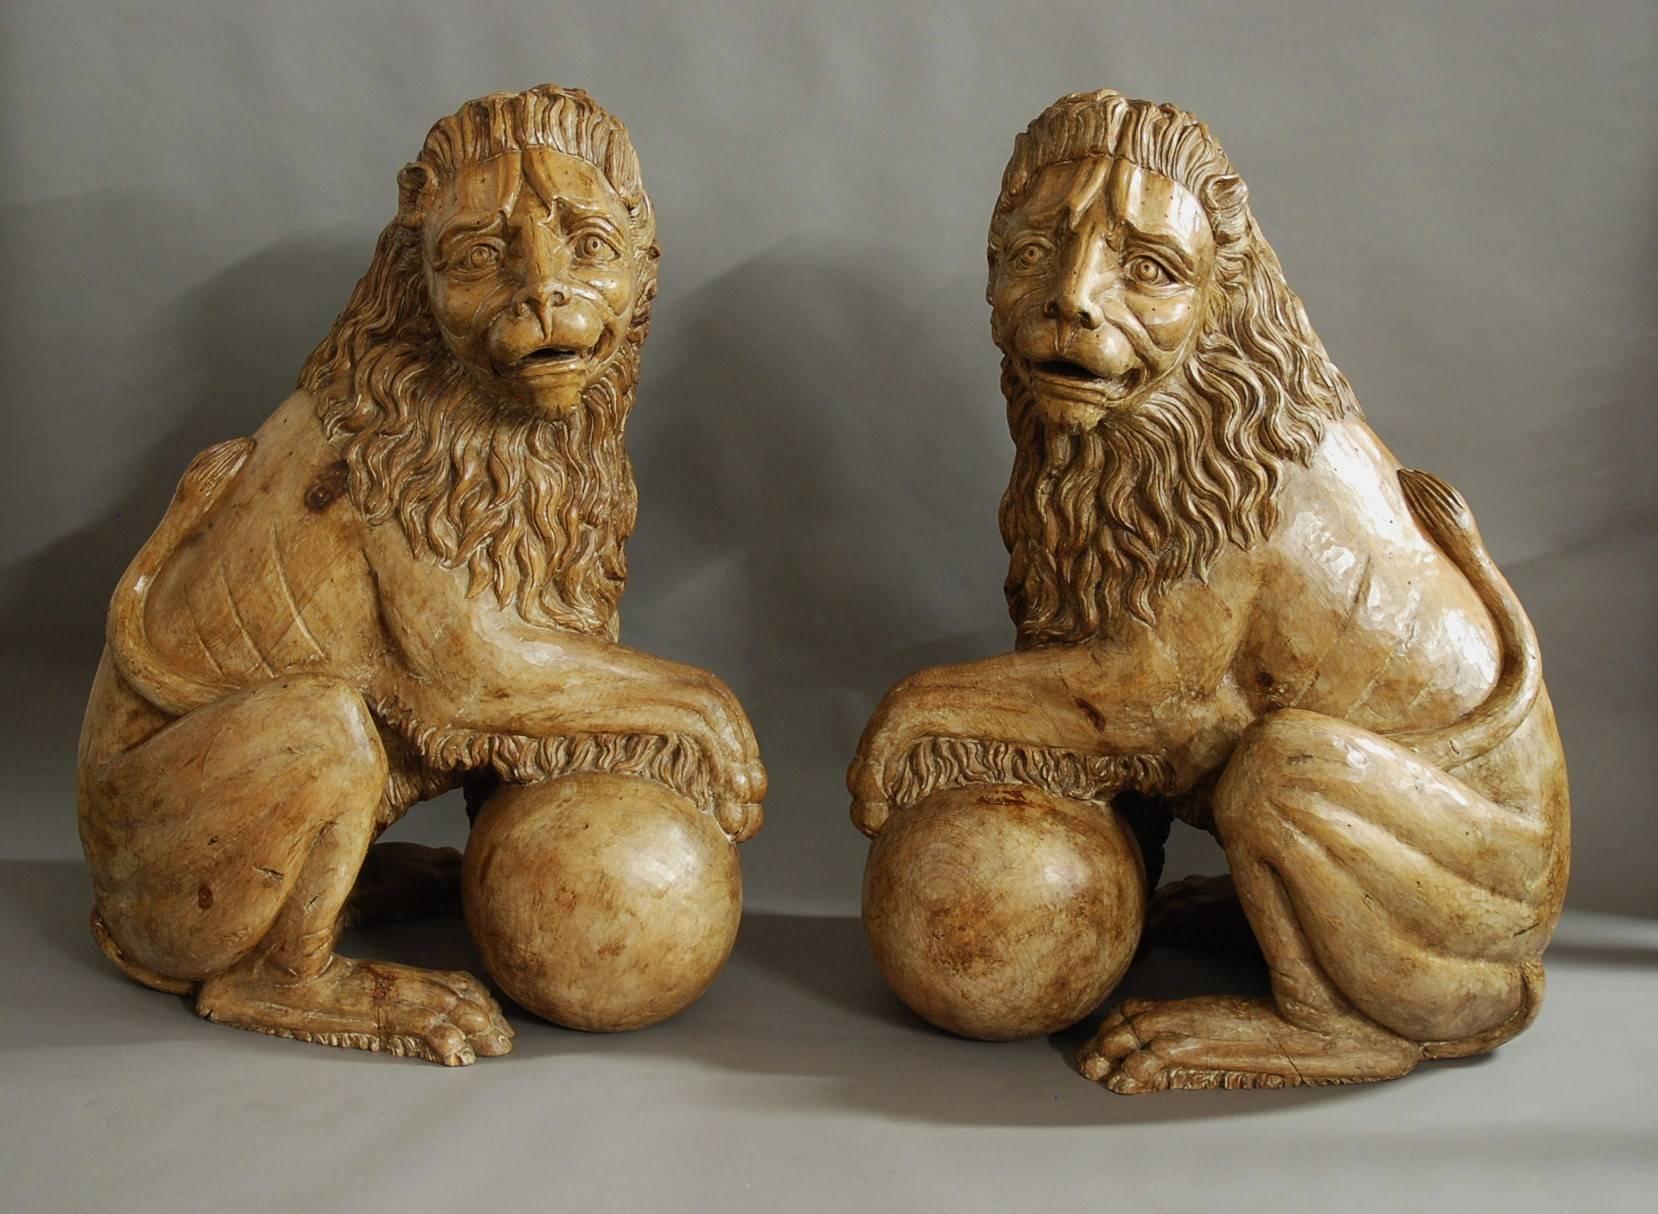 A magnificent pair of highly decorative 19th century Italian life size carved pine Medici lions.

These imposing figures are solid pine and are superbly carved, each lion seated with one front paw resting on a ball or sphere with head looking to